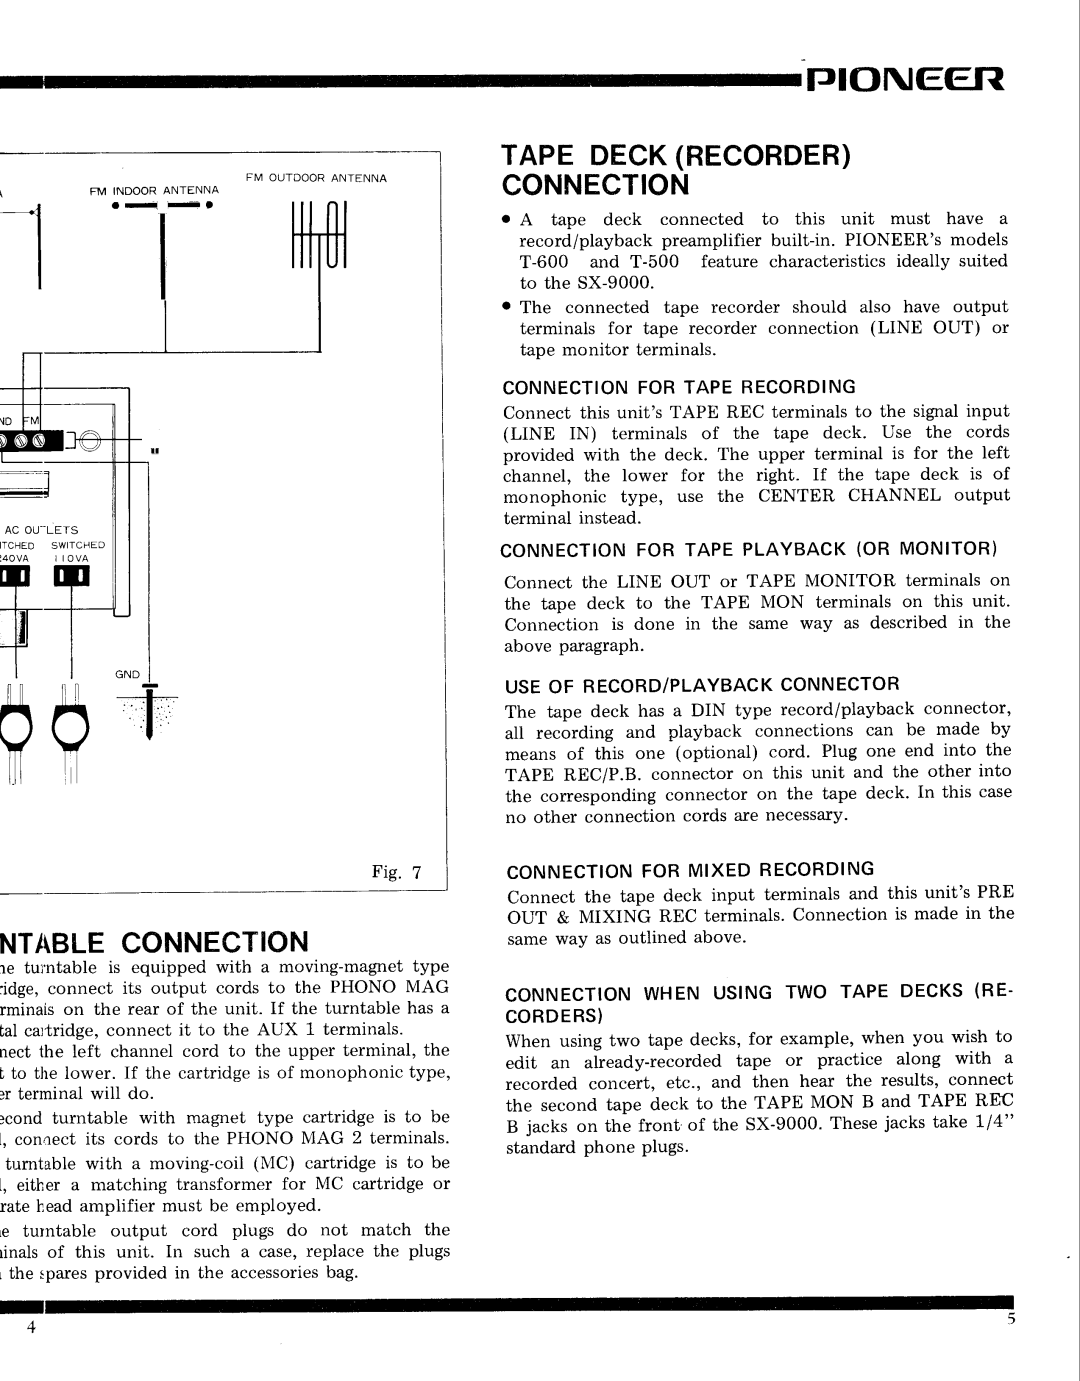 Pioneer SX-9000 service manual Pineer, Ntableconnection, Tape Deckrecorder Connection 